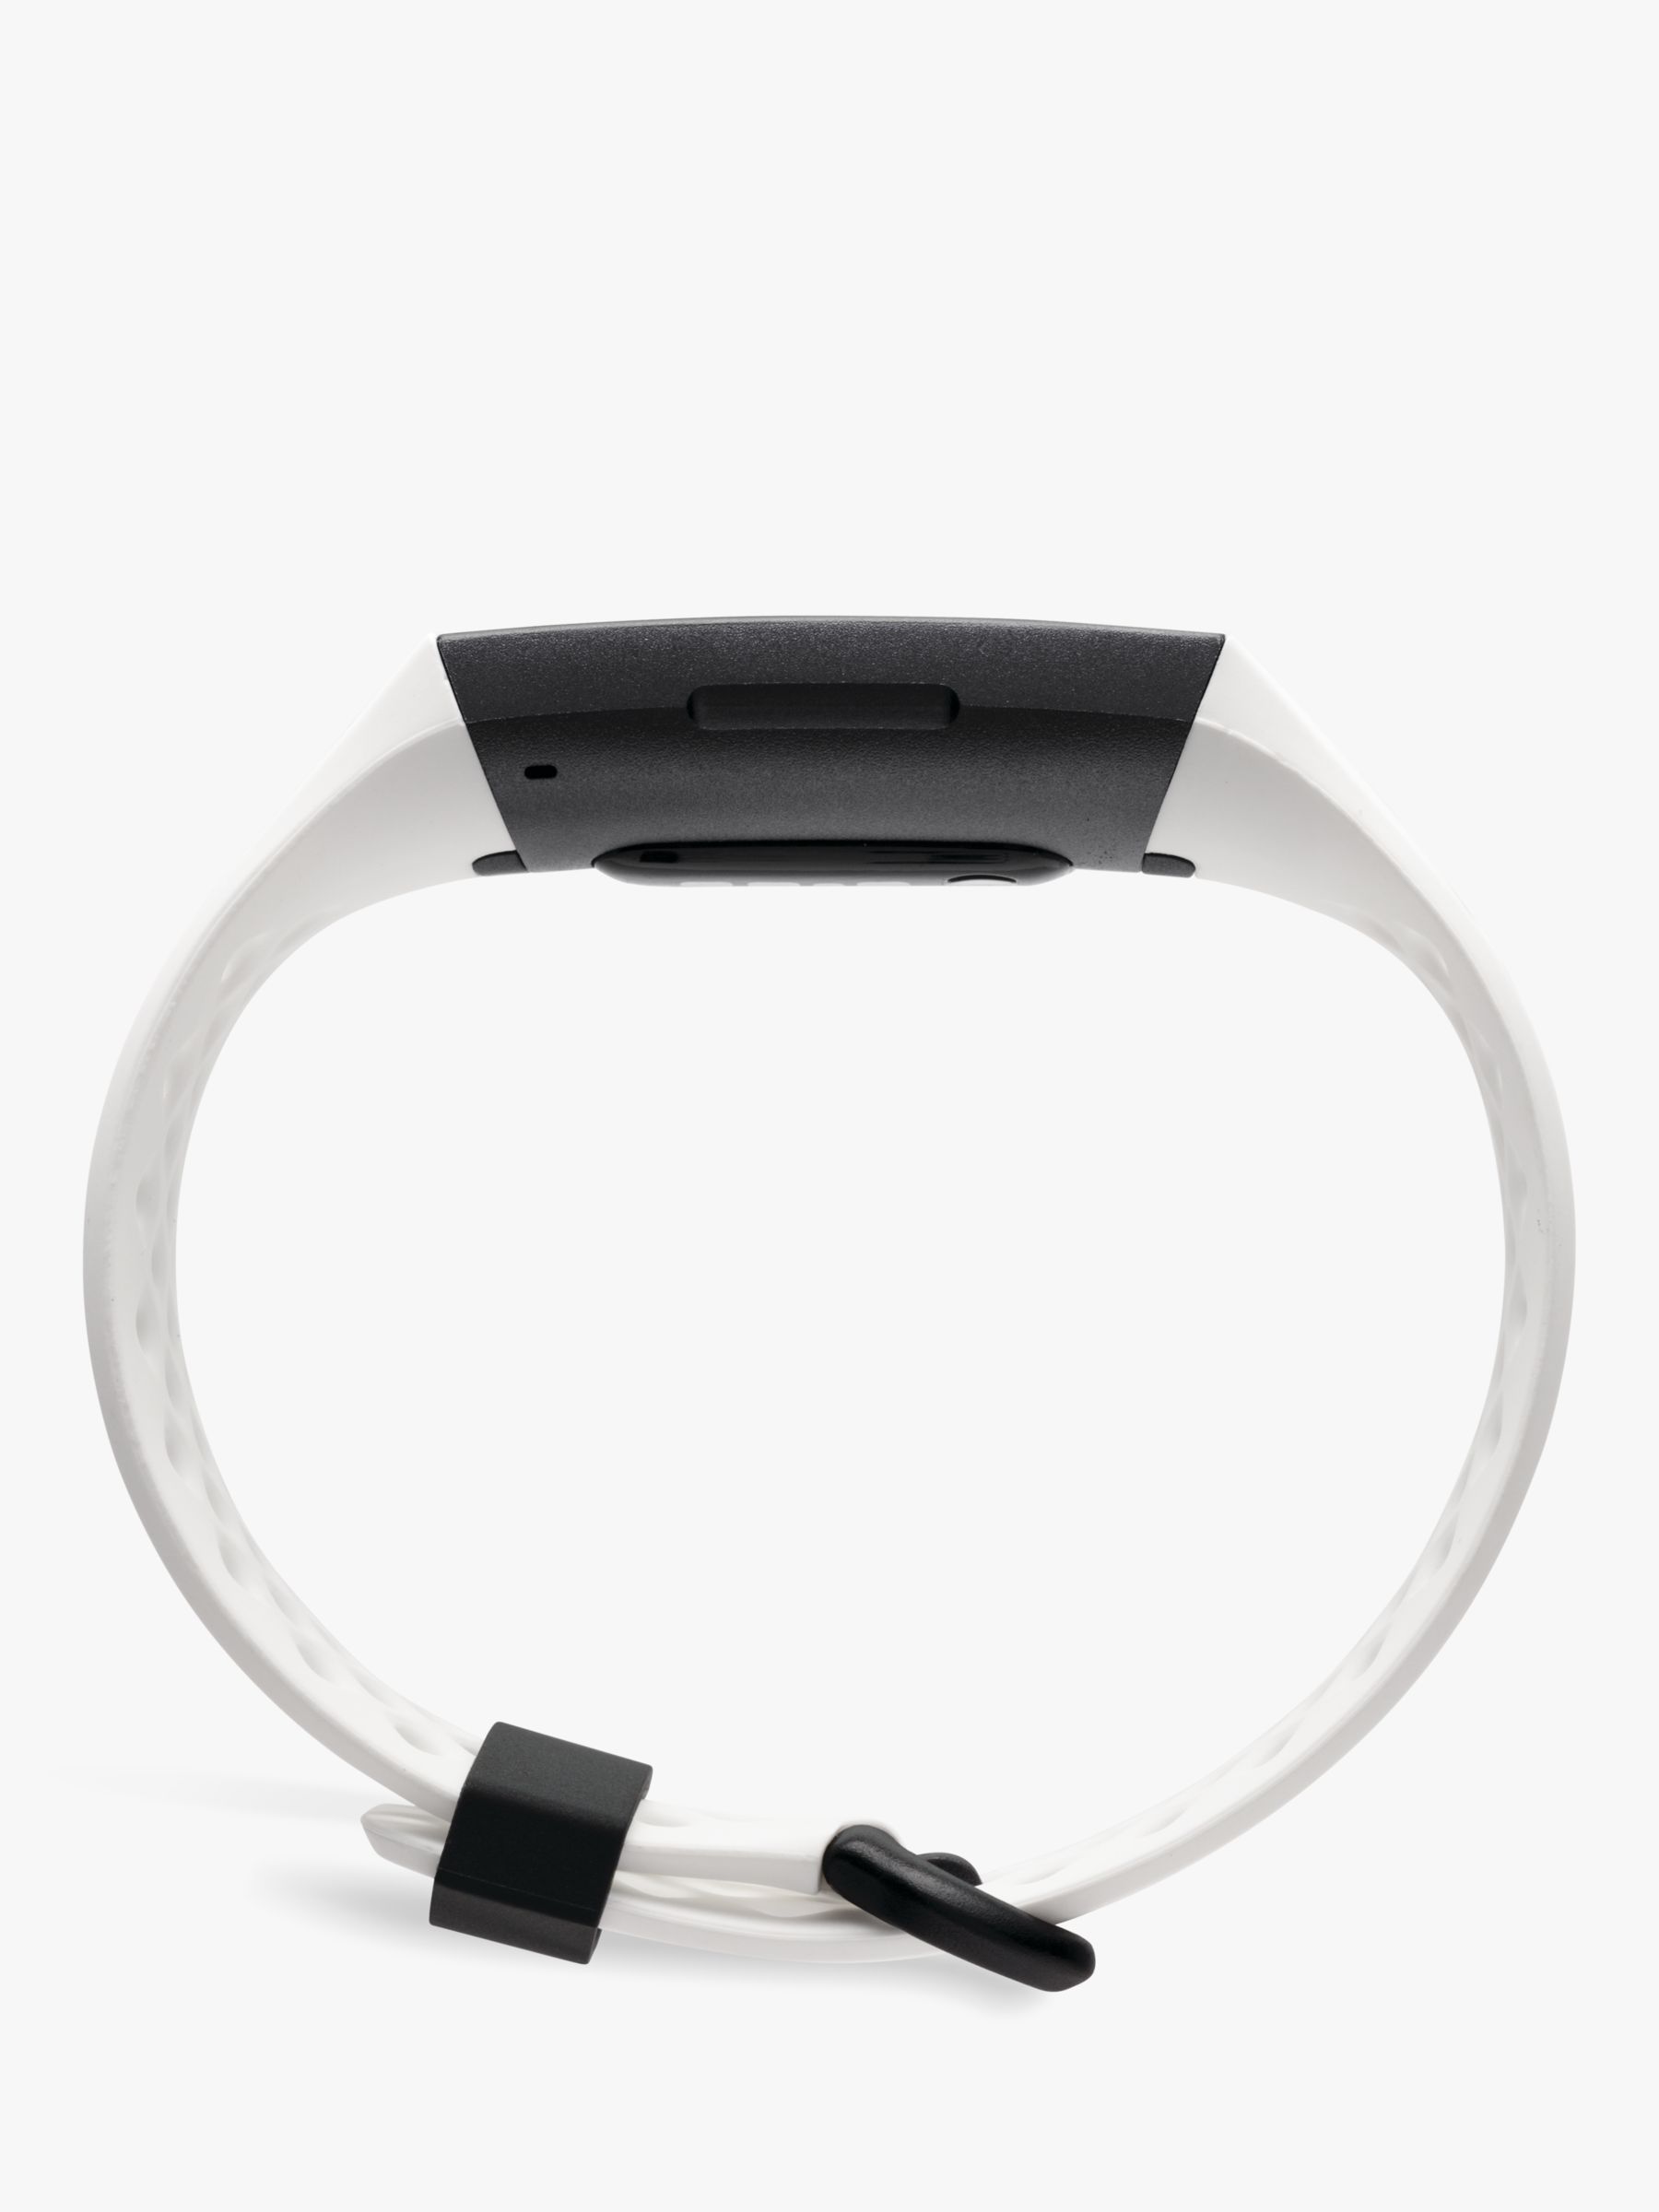 fitbit john lewis charge 3